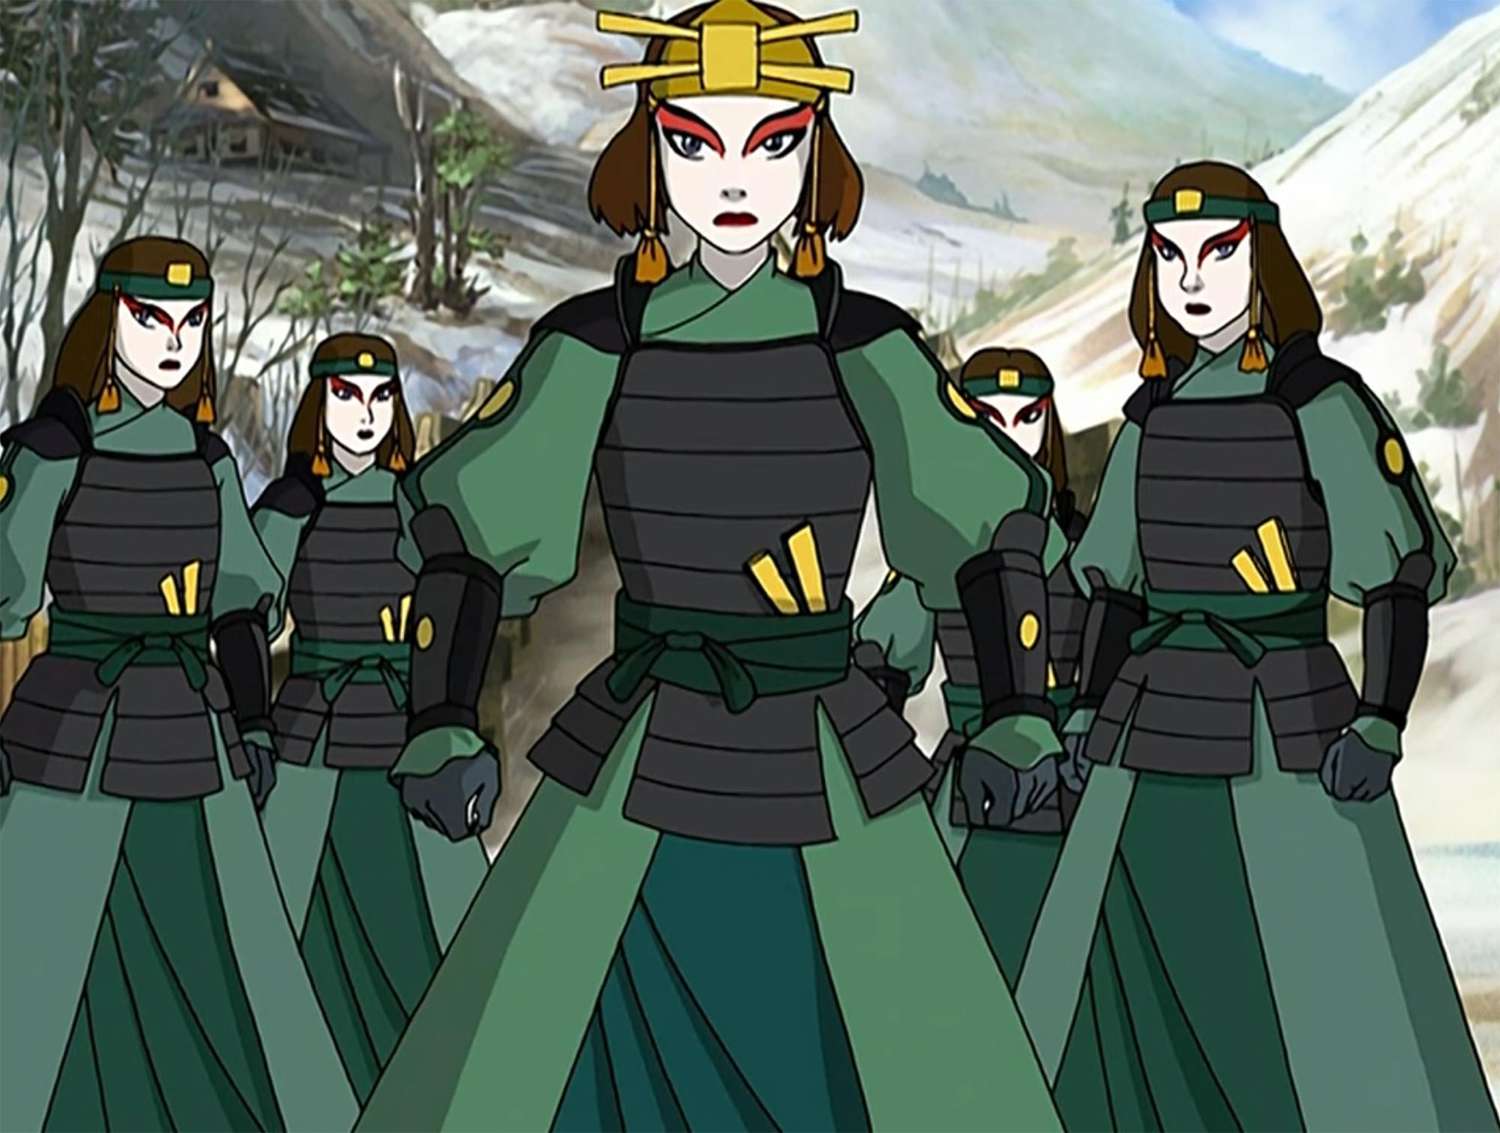 9. The Warriors of Kyoshi (book 1, episode 4)